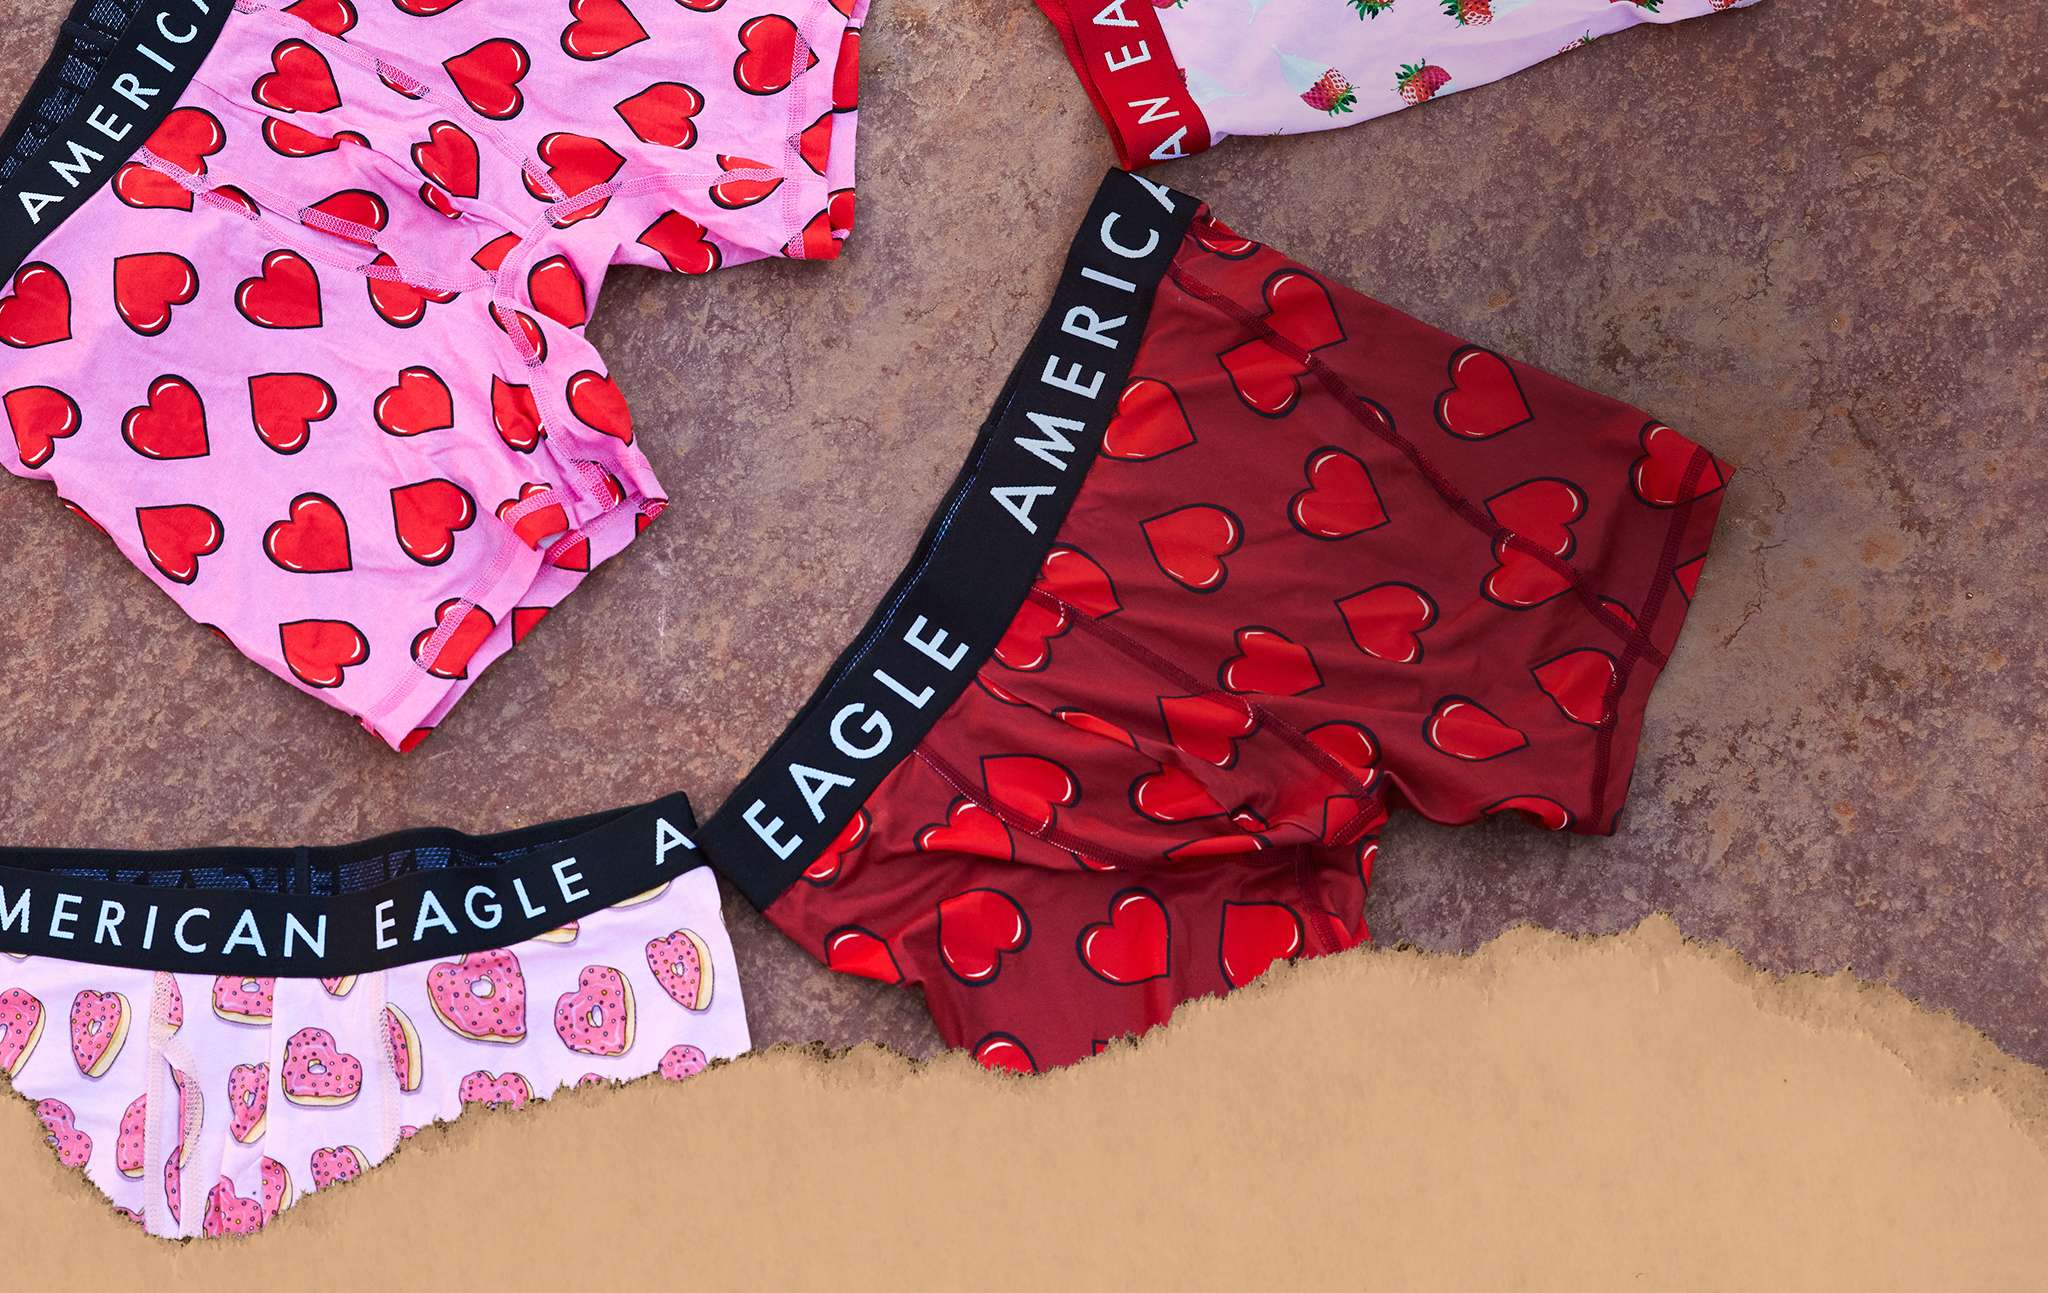 men's underwear covered in pink and red hearts